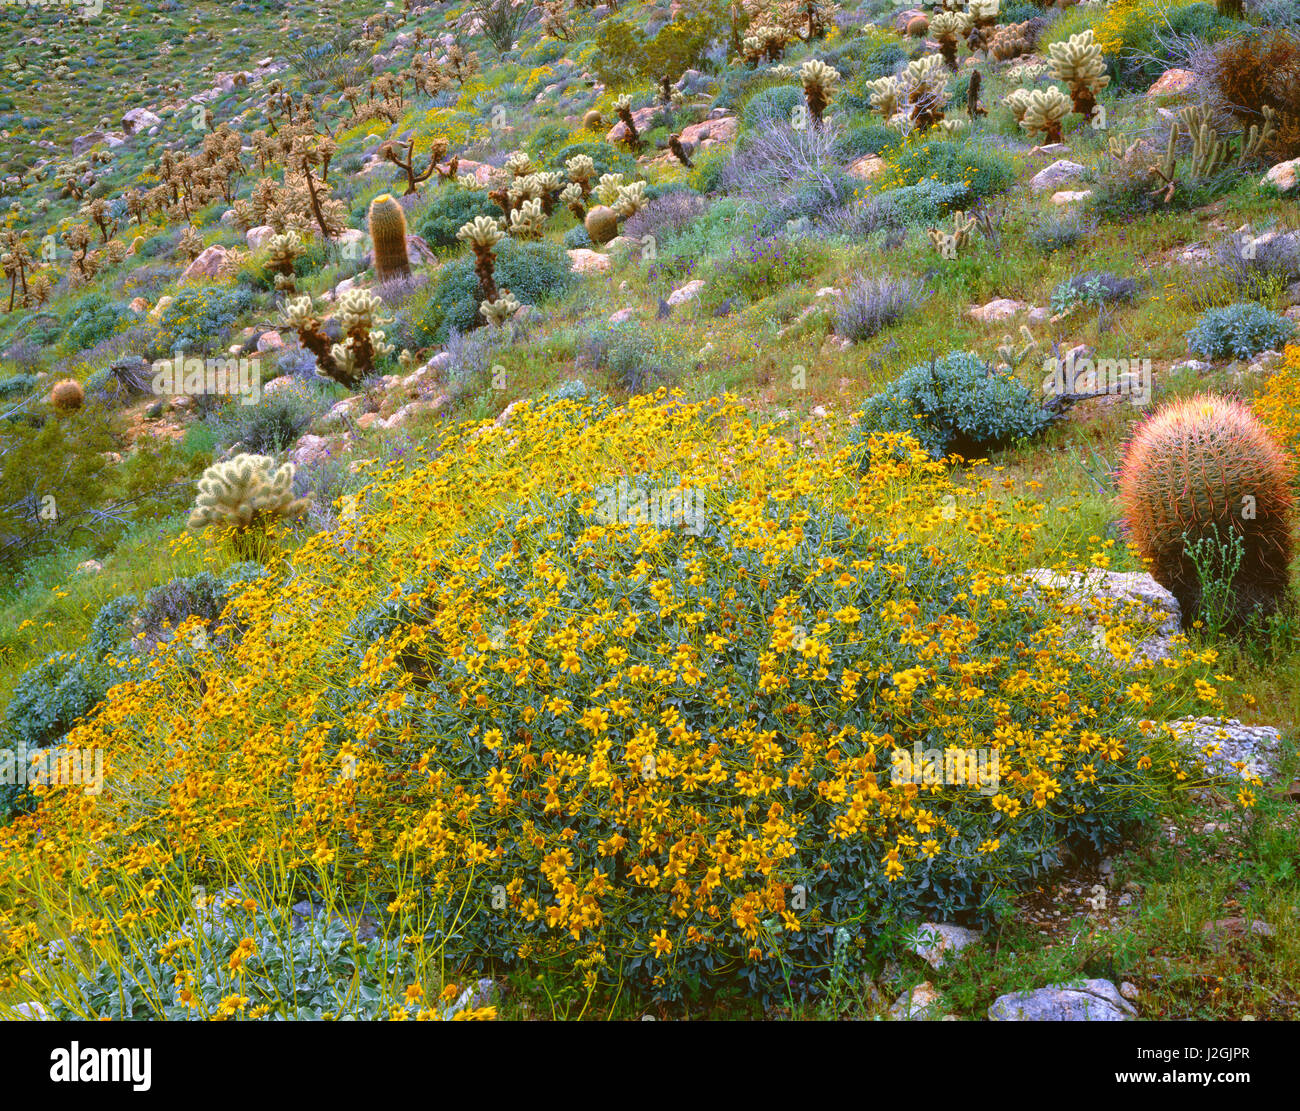 USA, California, Anza Borrego Desert State Park, Brittlebush blooms among barrel cactus and teddybear cholla in Mason Valley. (Large format sizes available) Stock Photo